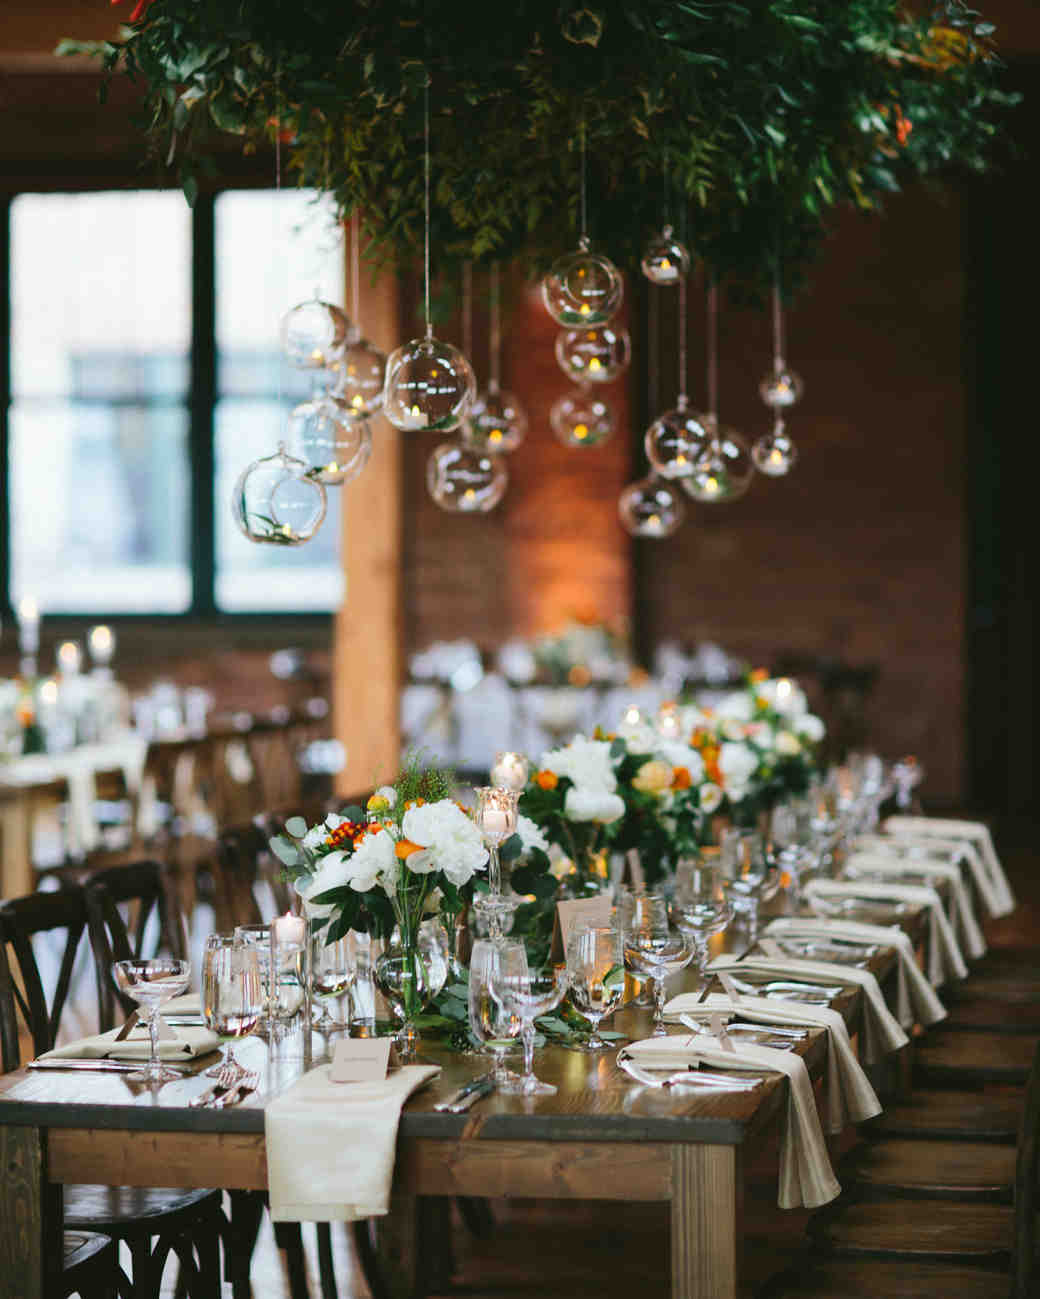 Wedding Table Decorations
 28 Ideas for Sitting Pretty at Your Head Table